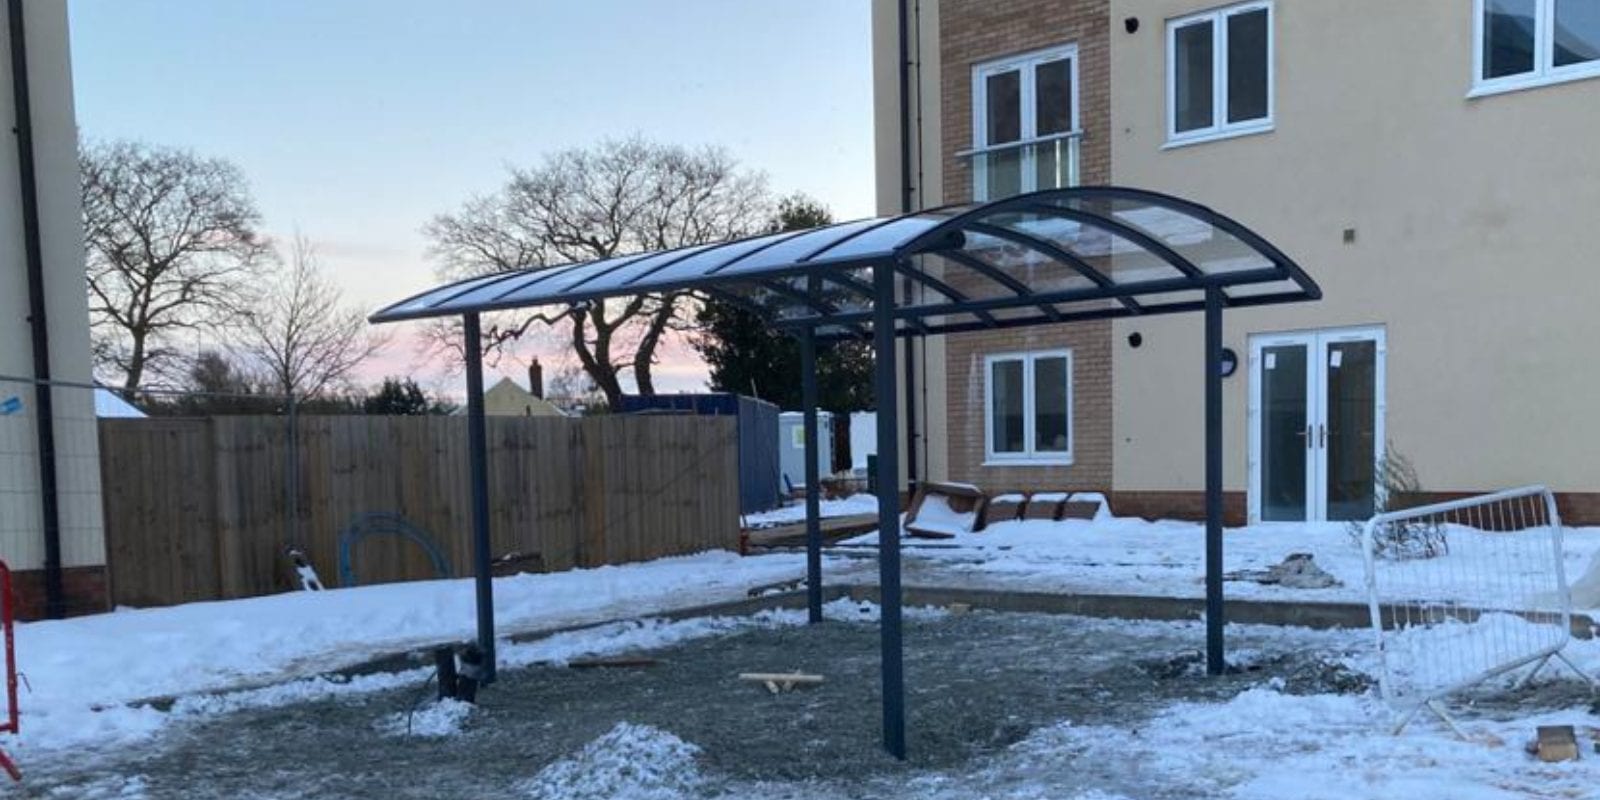 Cycle shelter we designed for Meadow Walk Retirement Village